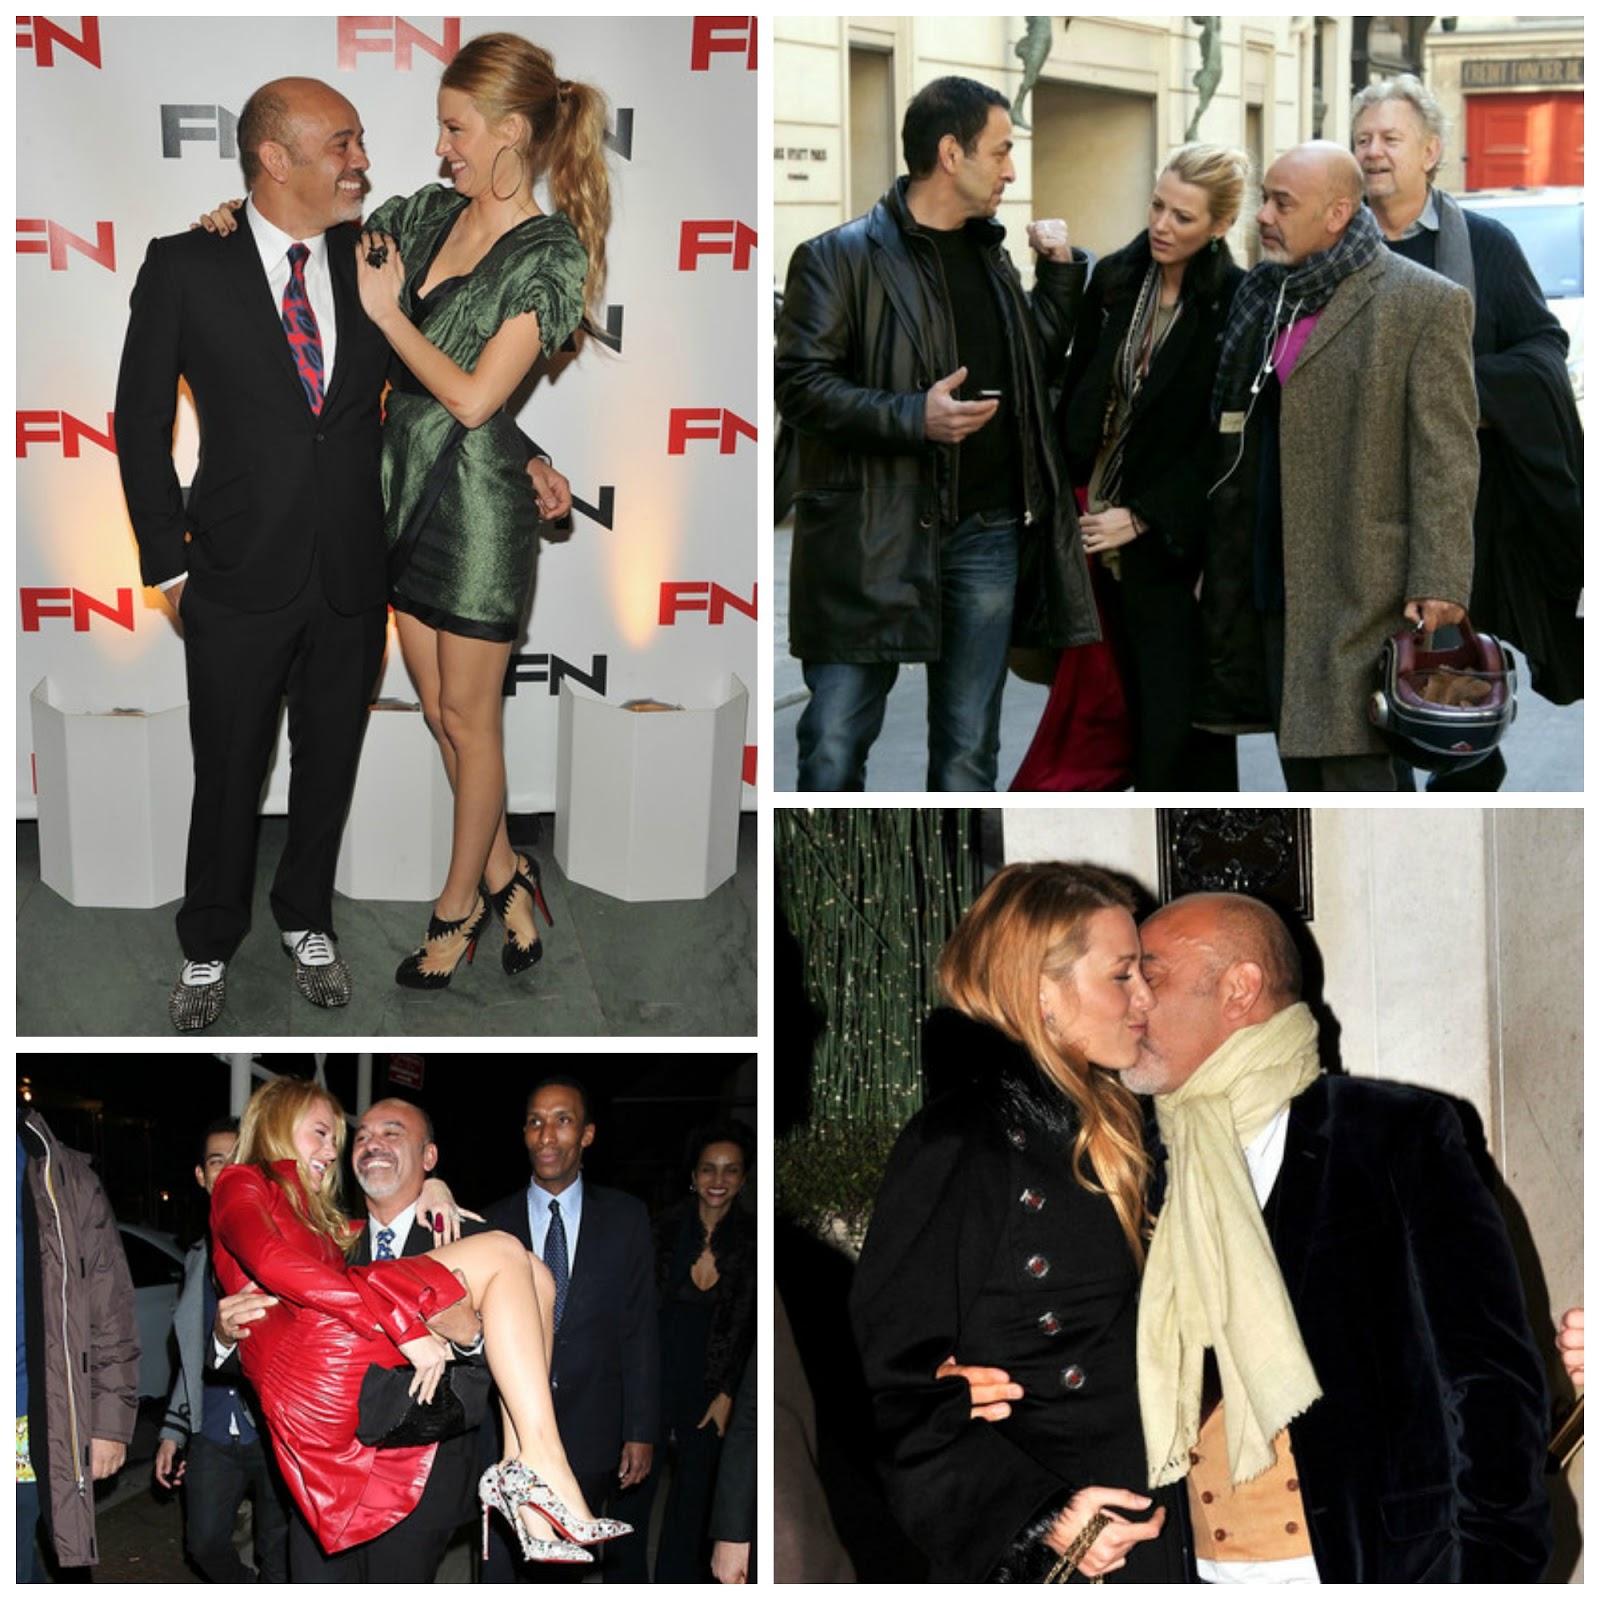 Christian Louboutin - Hold on tight! Blake Lively and Christian